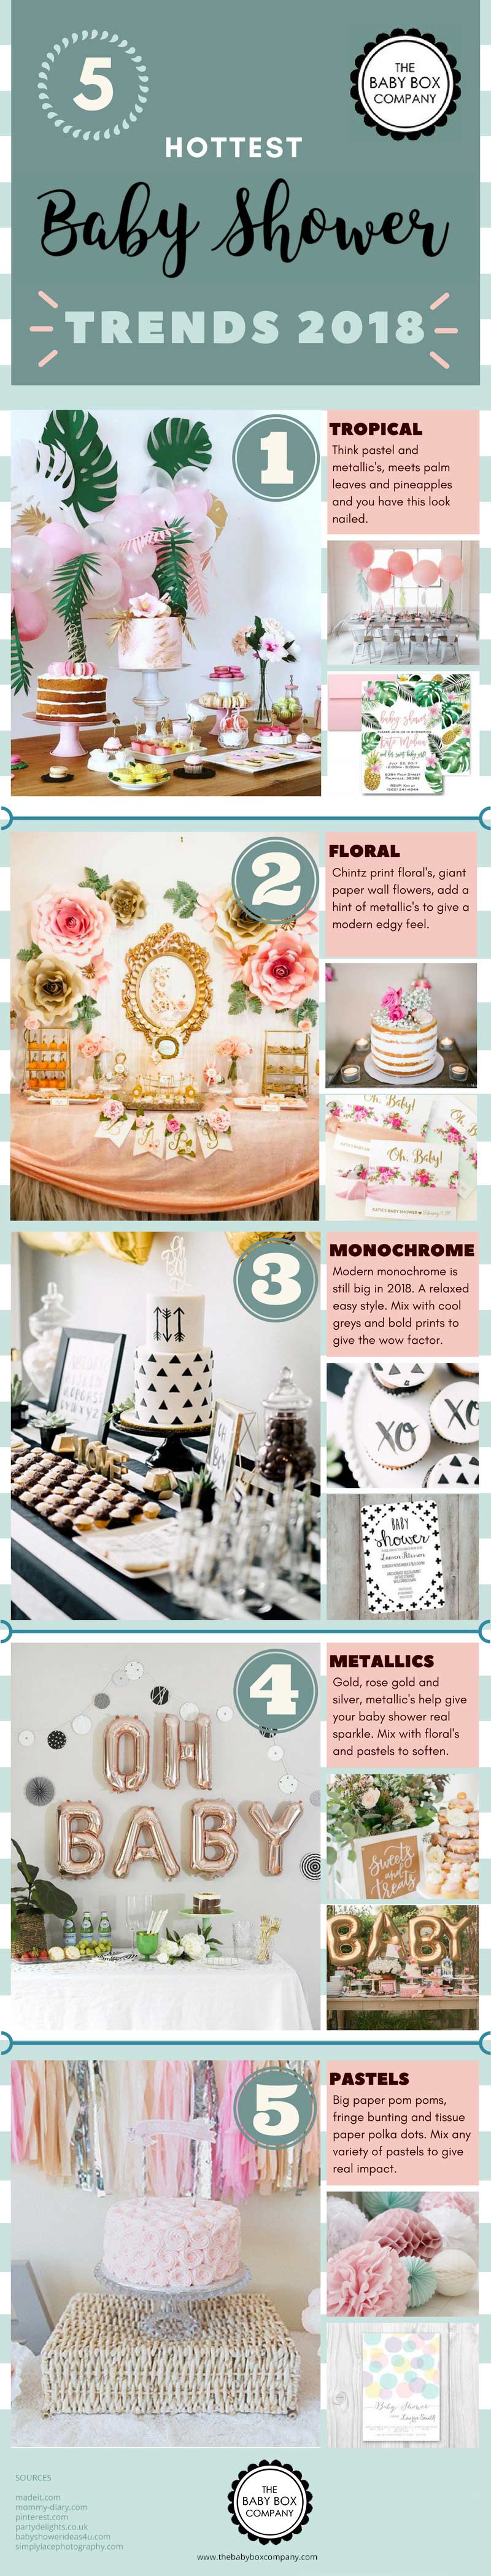 5 Hottest Baby Shower Trends and Ideas for 2018